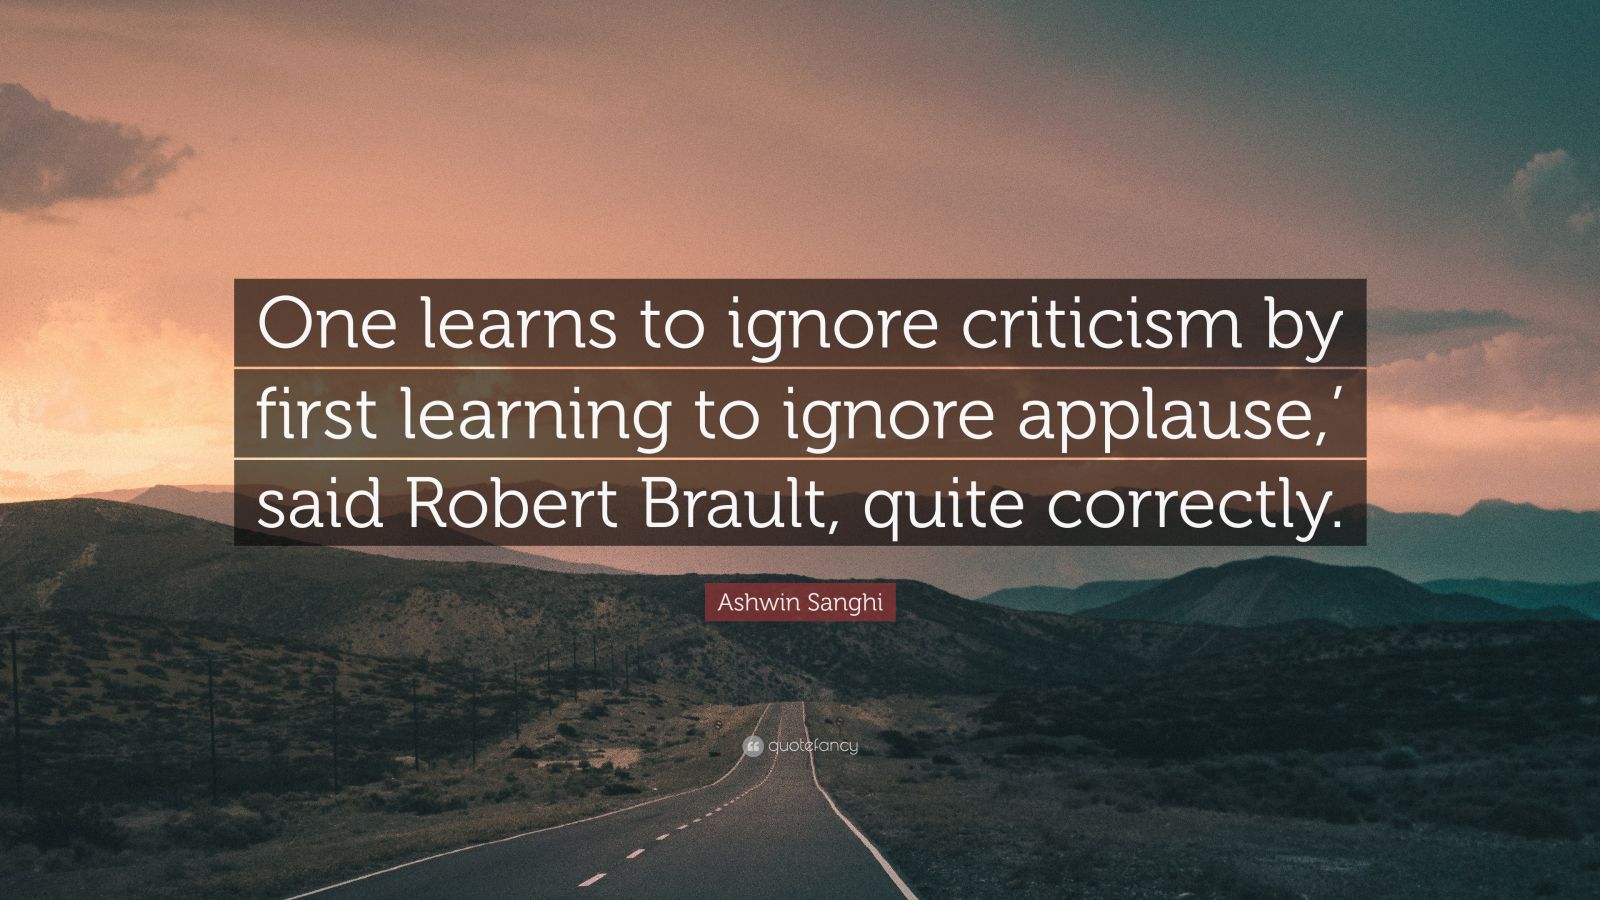 Ashwin Sanghi Quote: “One learns to ignore criticism by first ...